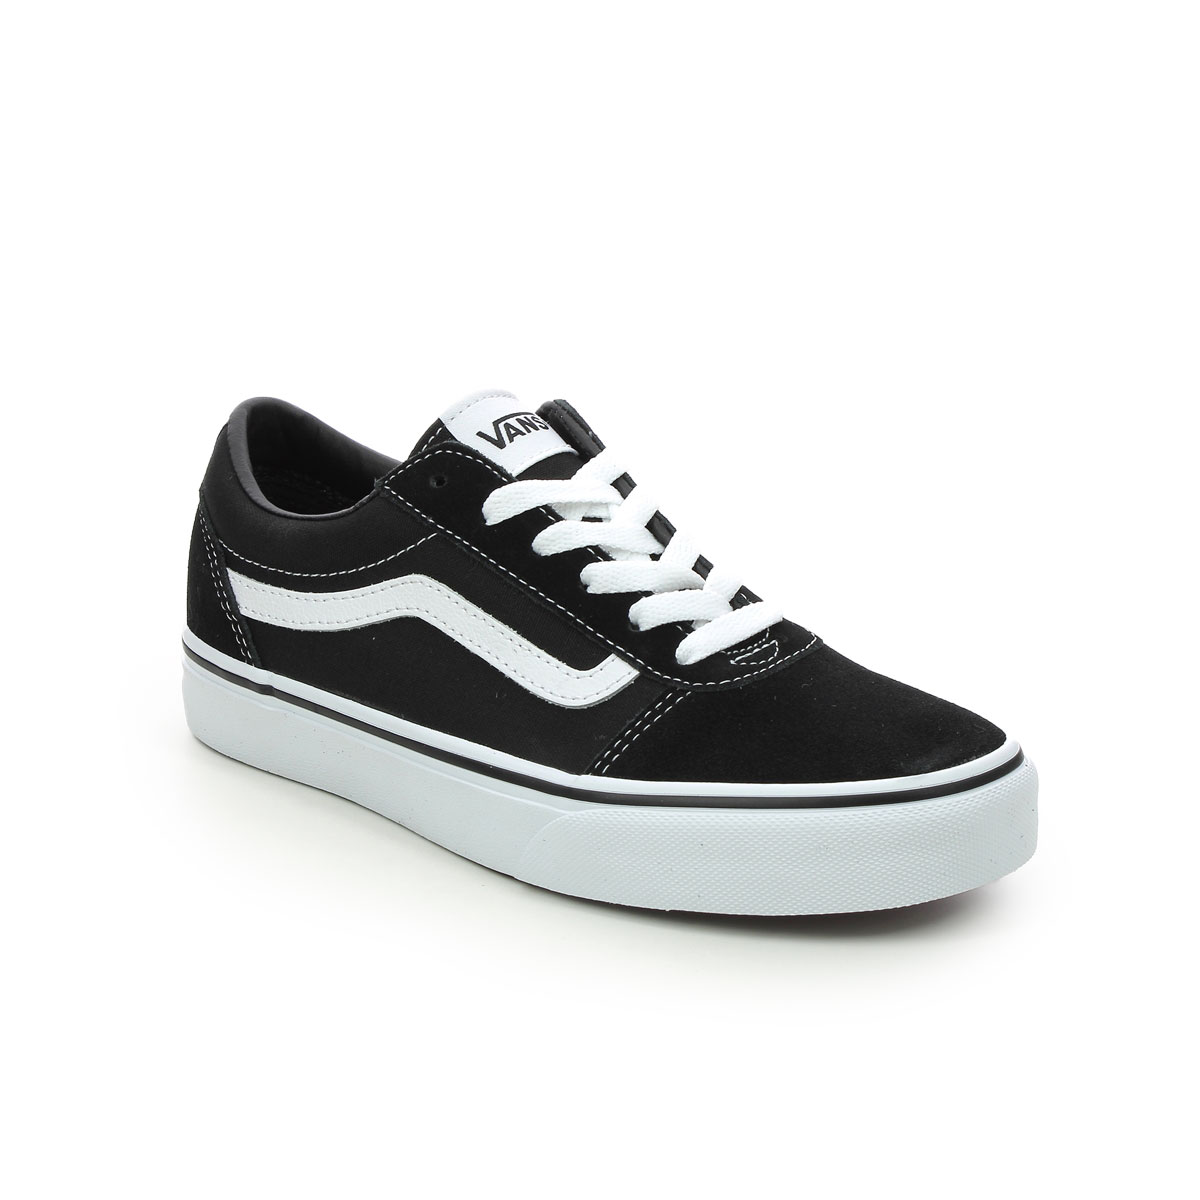 Vans Ward Yth Black Kids Boys Trainers VN0A38J9I-JU in a Plain Textile in Size 6